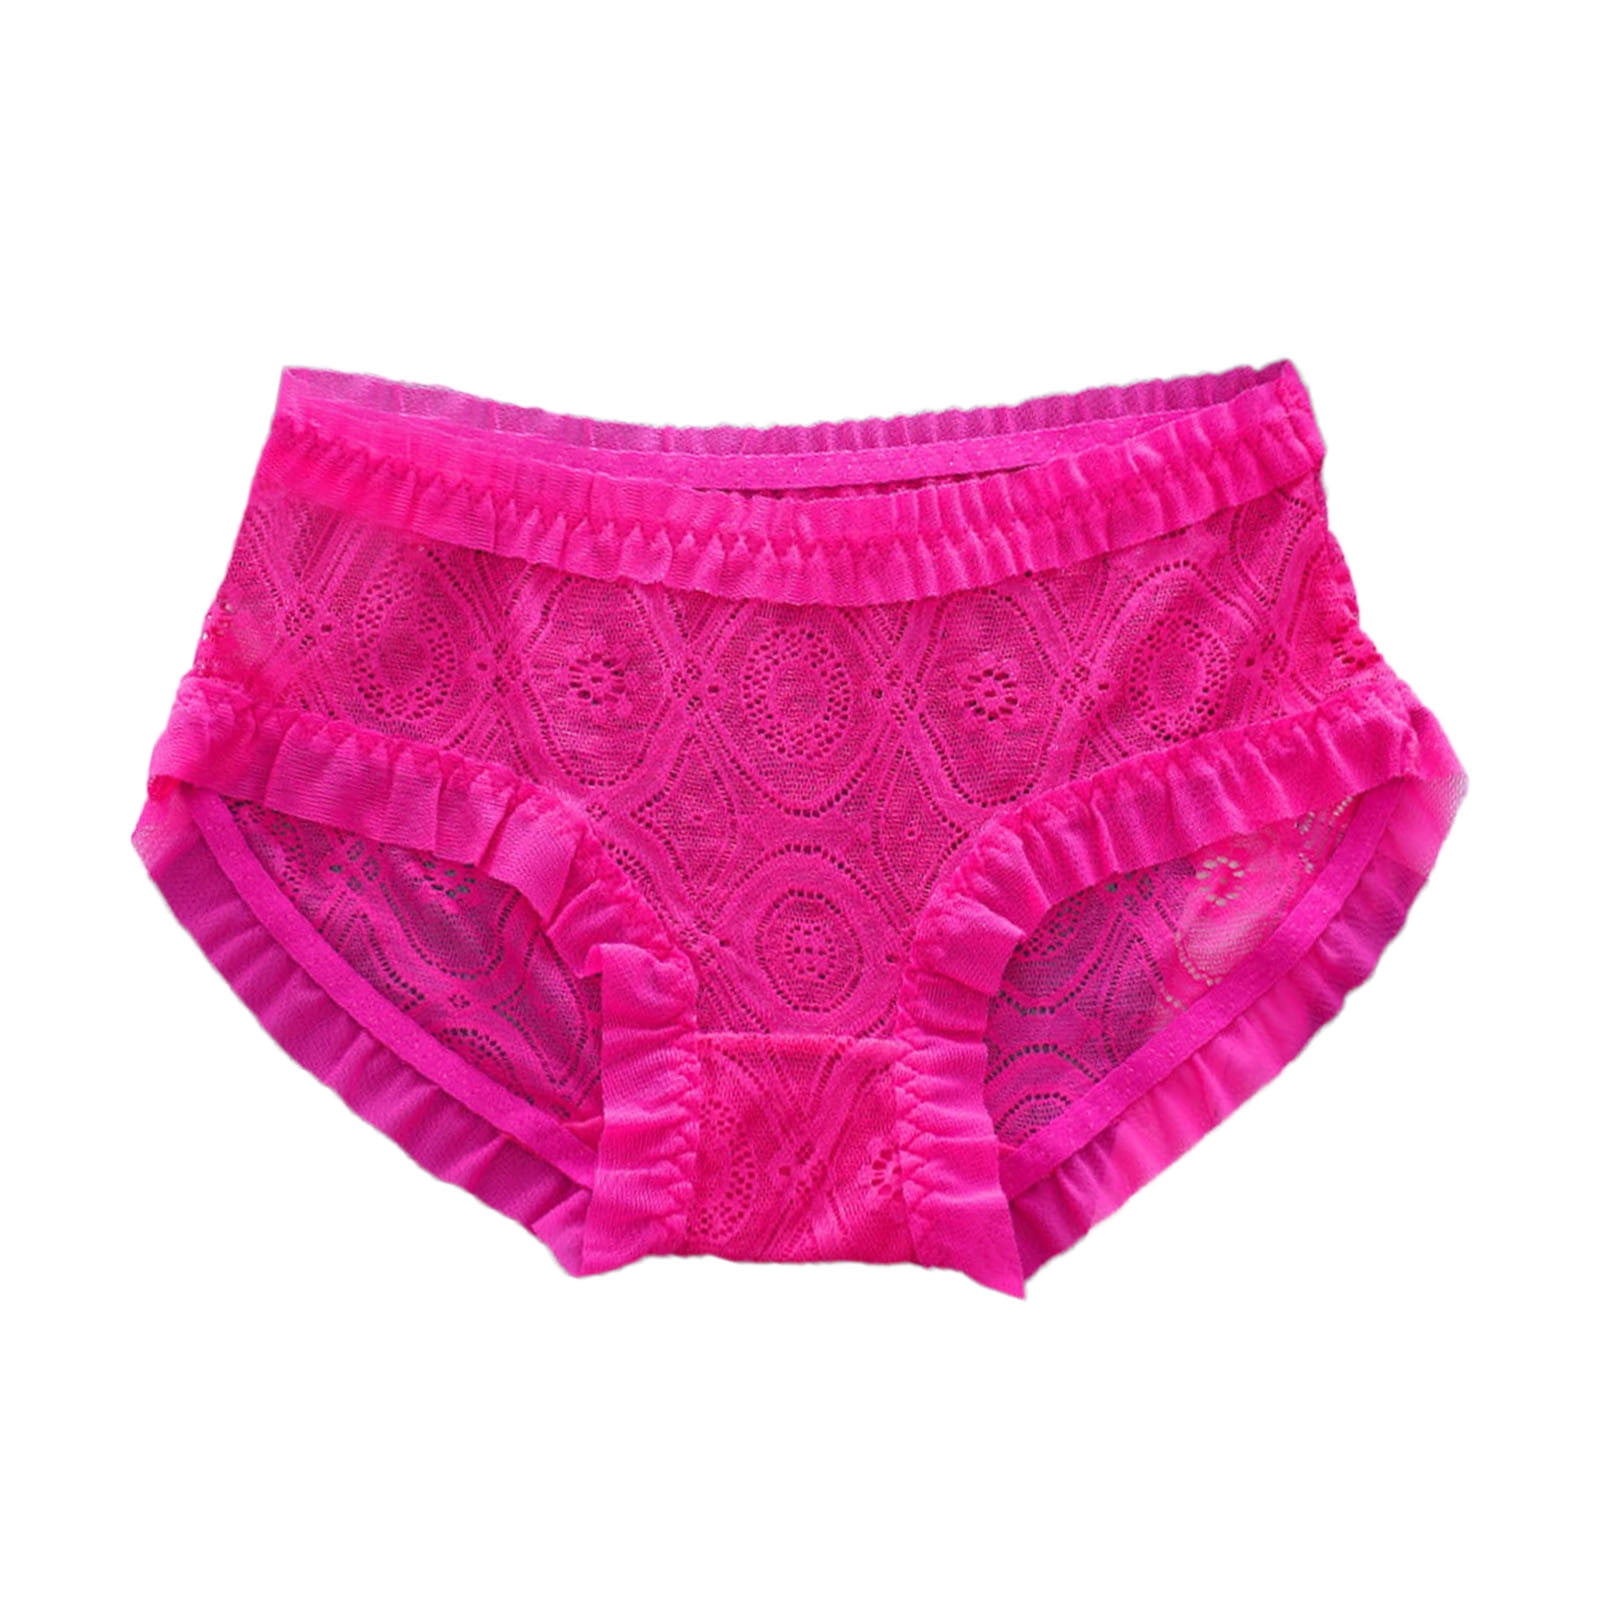 JDEFEG Scrunch Panties for Women Womens High Waisted Panties Smoothing  Panty High Cut Brief Underwear for Women Comfortable Underpants Bikini  Panties for Women Pack Size 7 Lace Pink One Size 